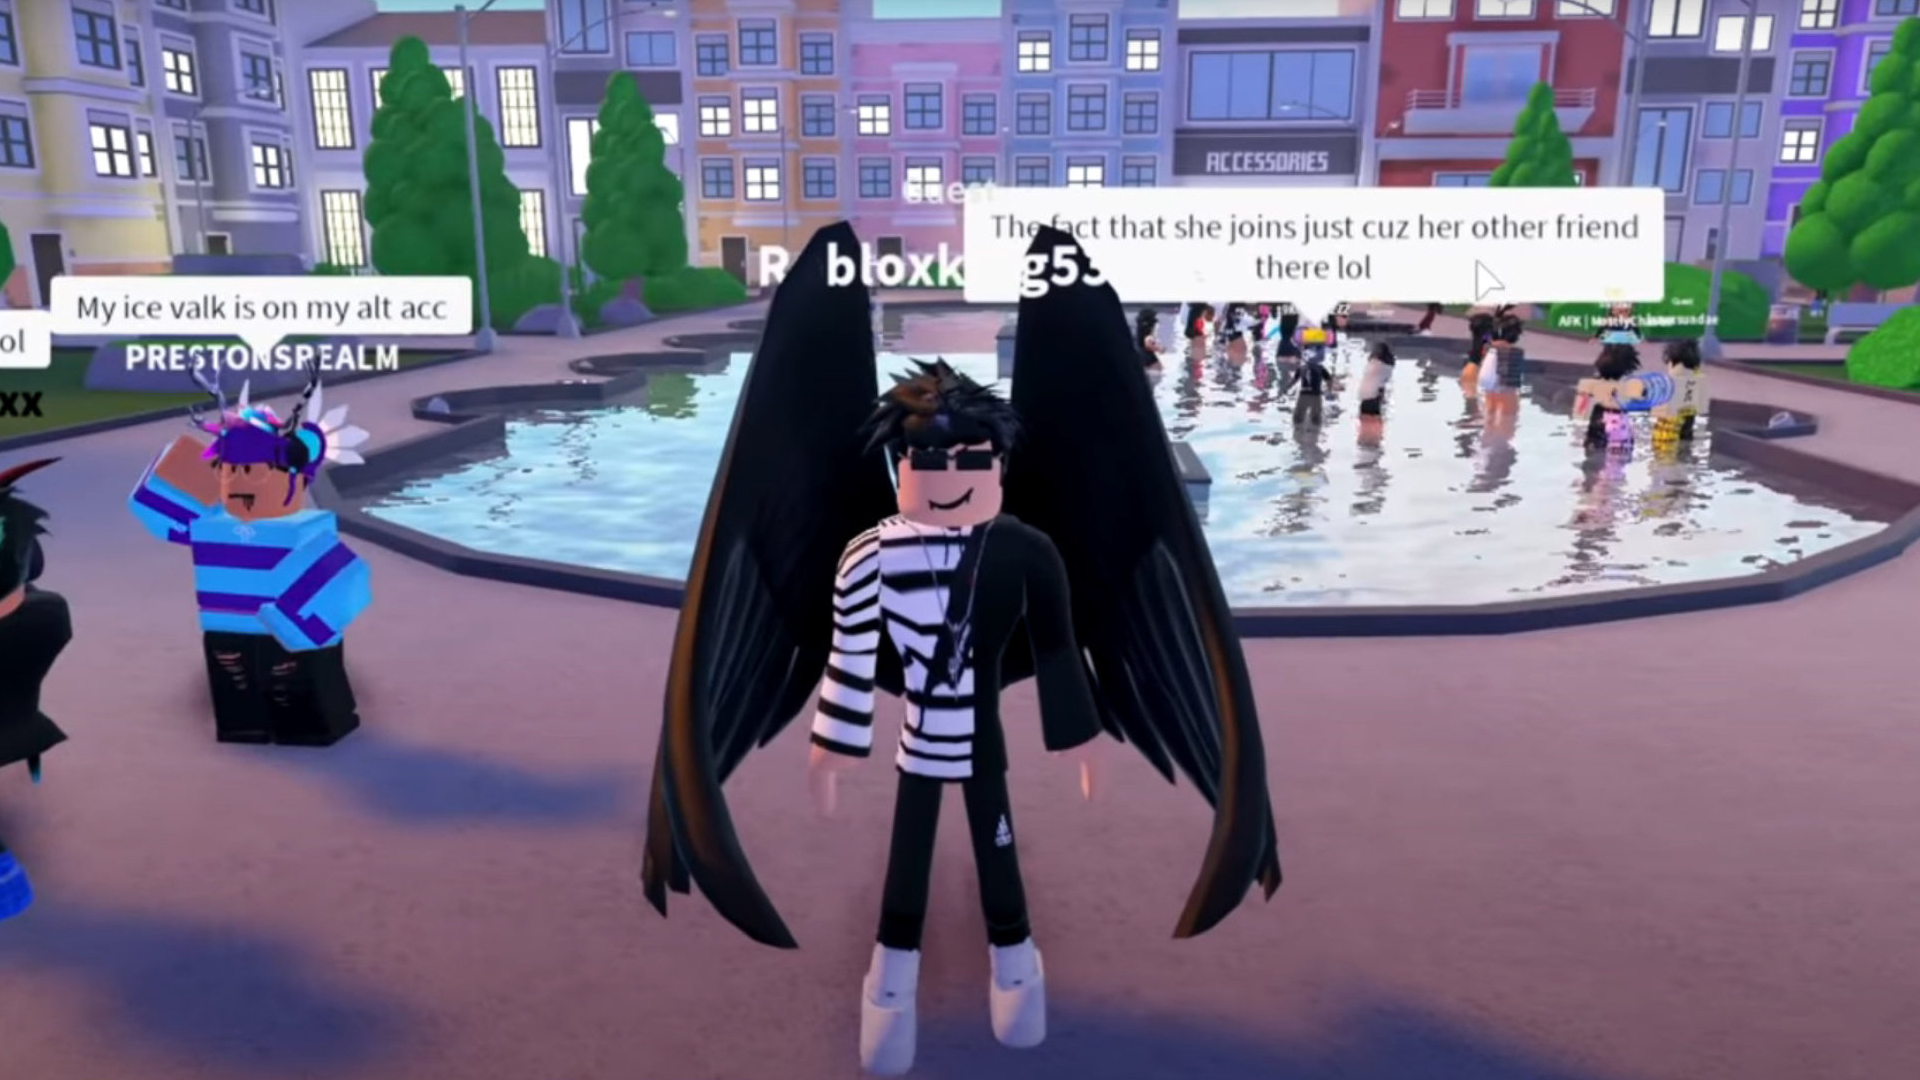 Becoming a SLENDER for a day (roblox) 